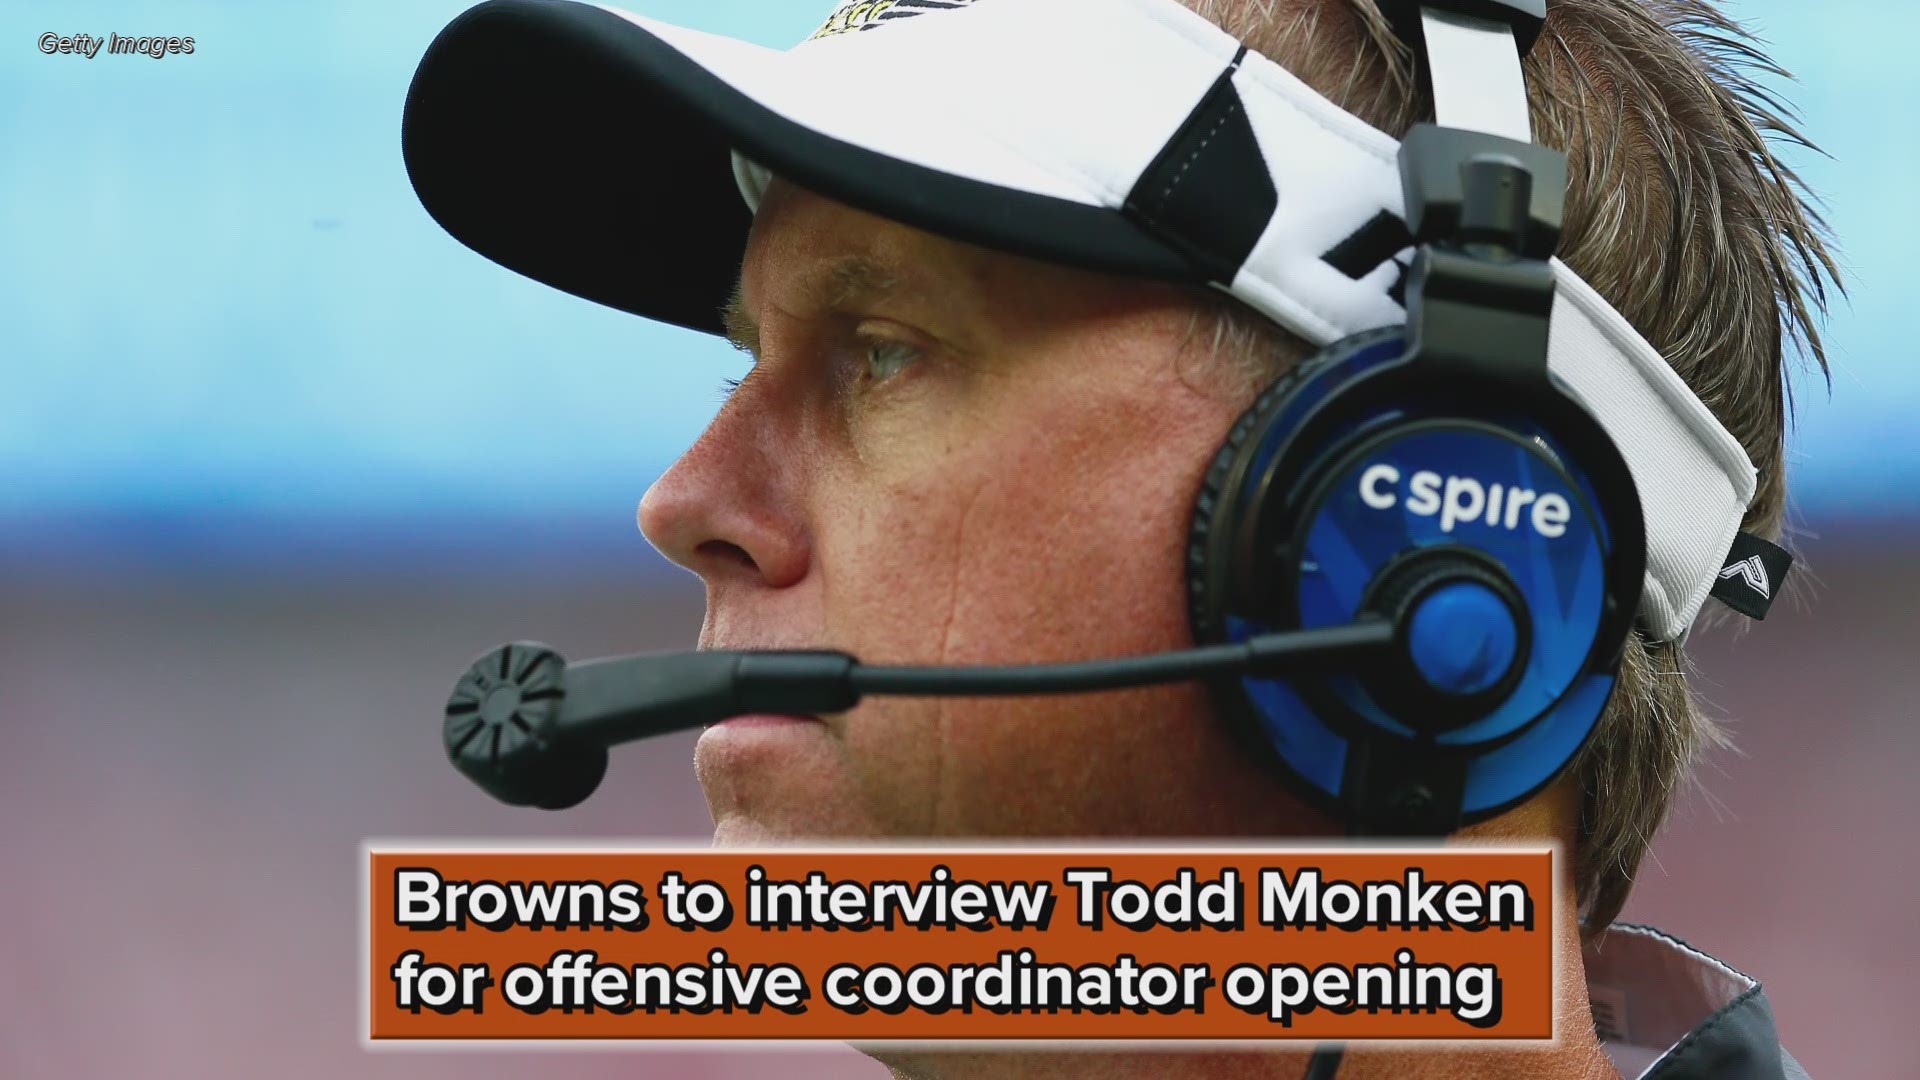 The Cleveland Browns are expected to interview former Tampa Bay assistant coach Todd Monken for their vacant offensive coordinator position.